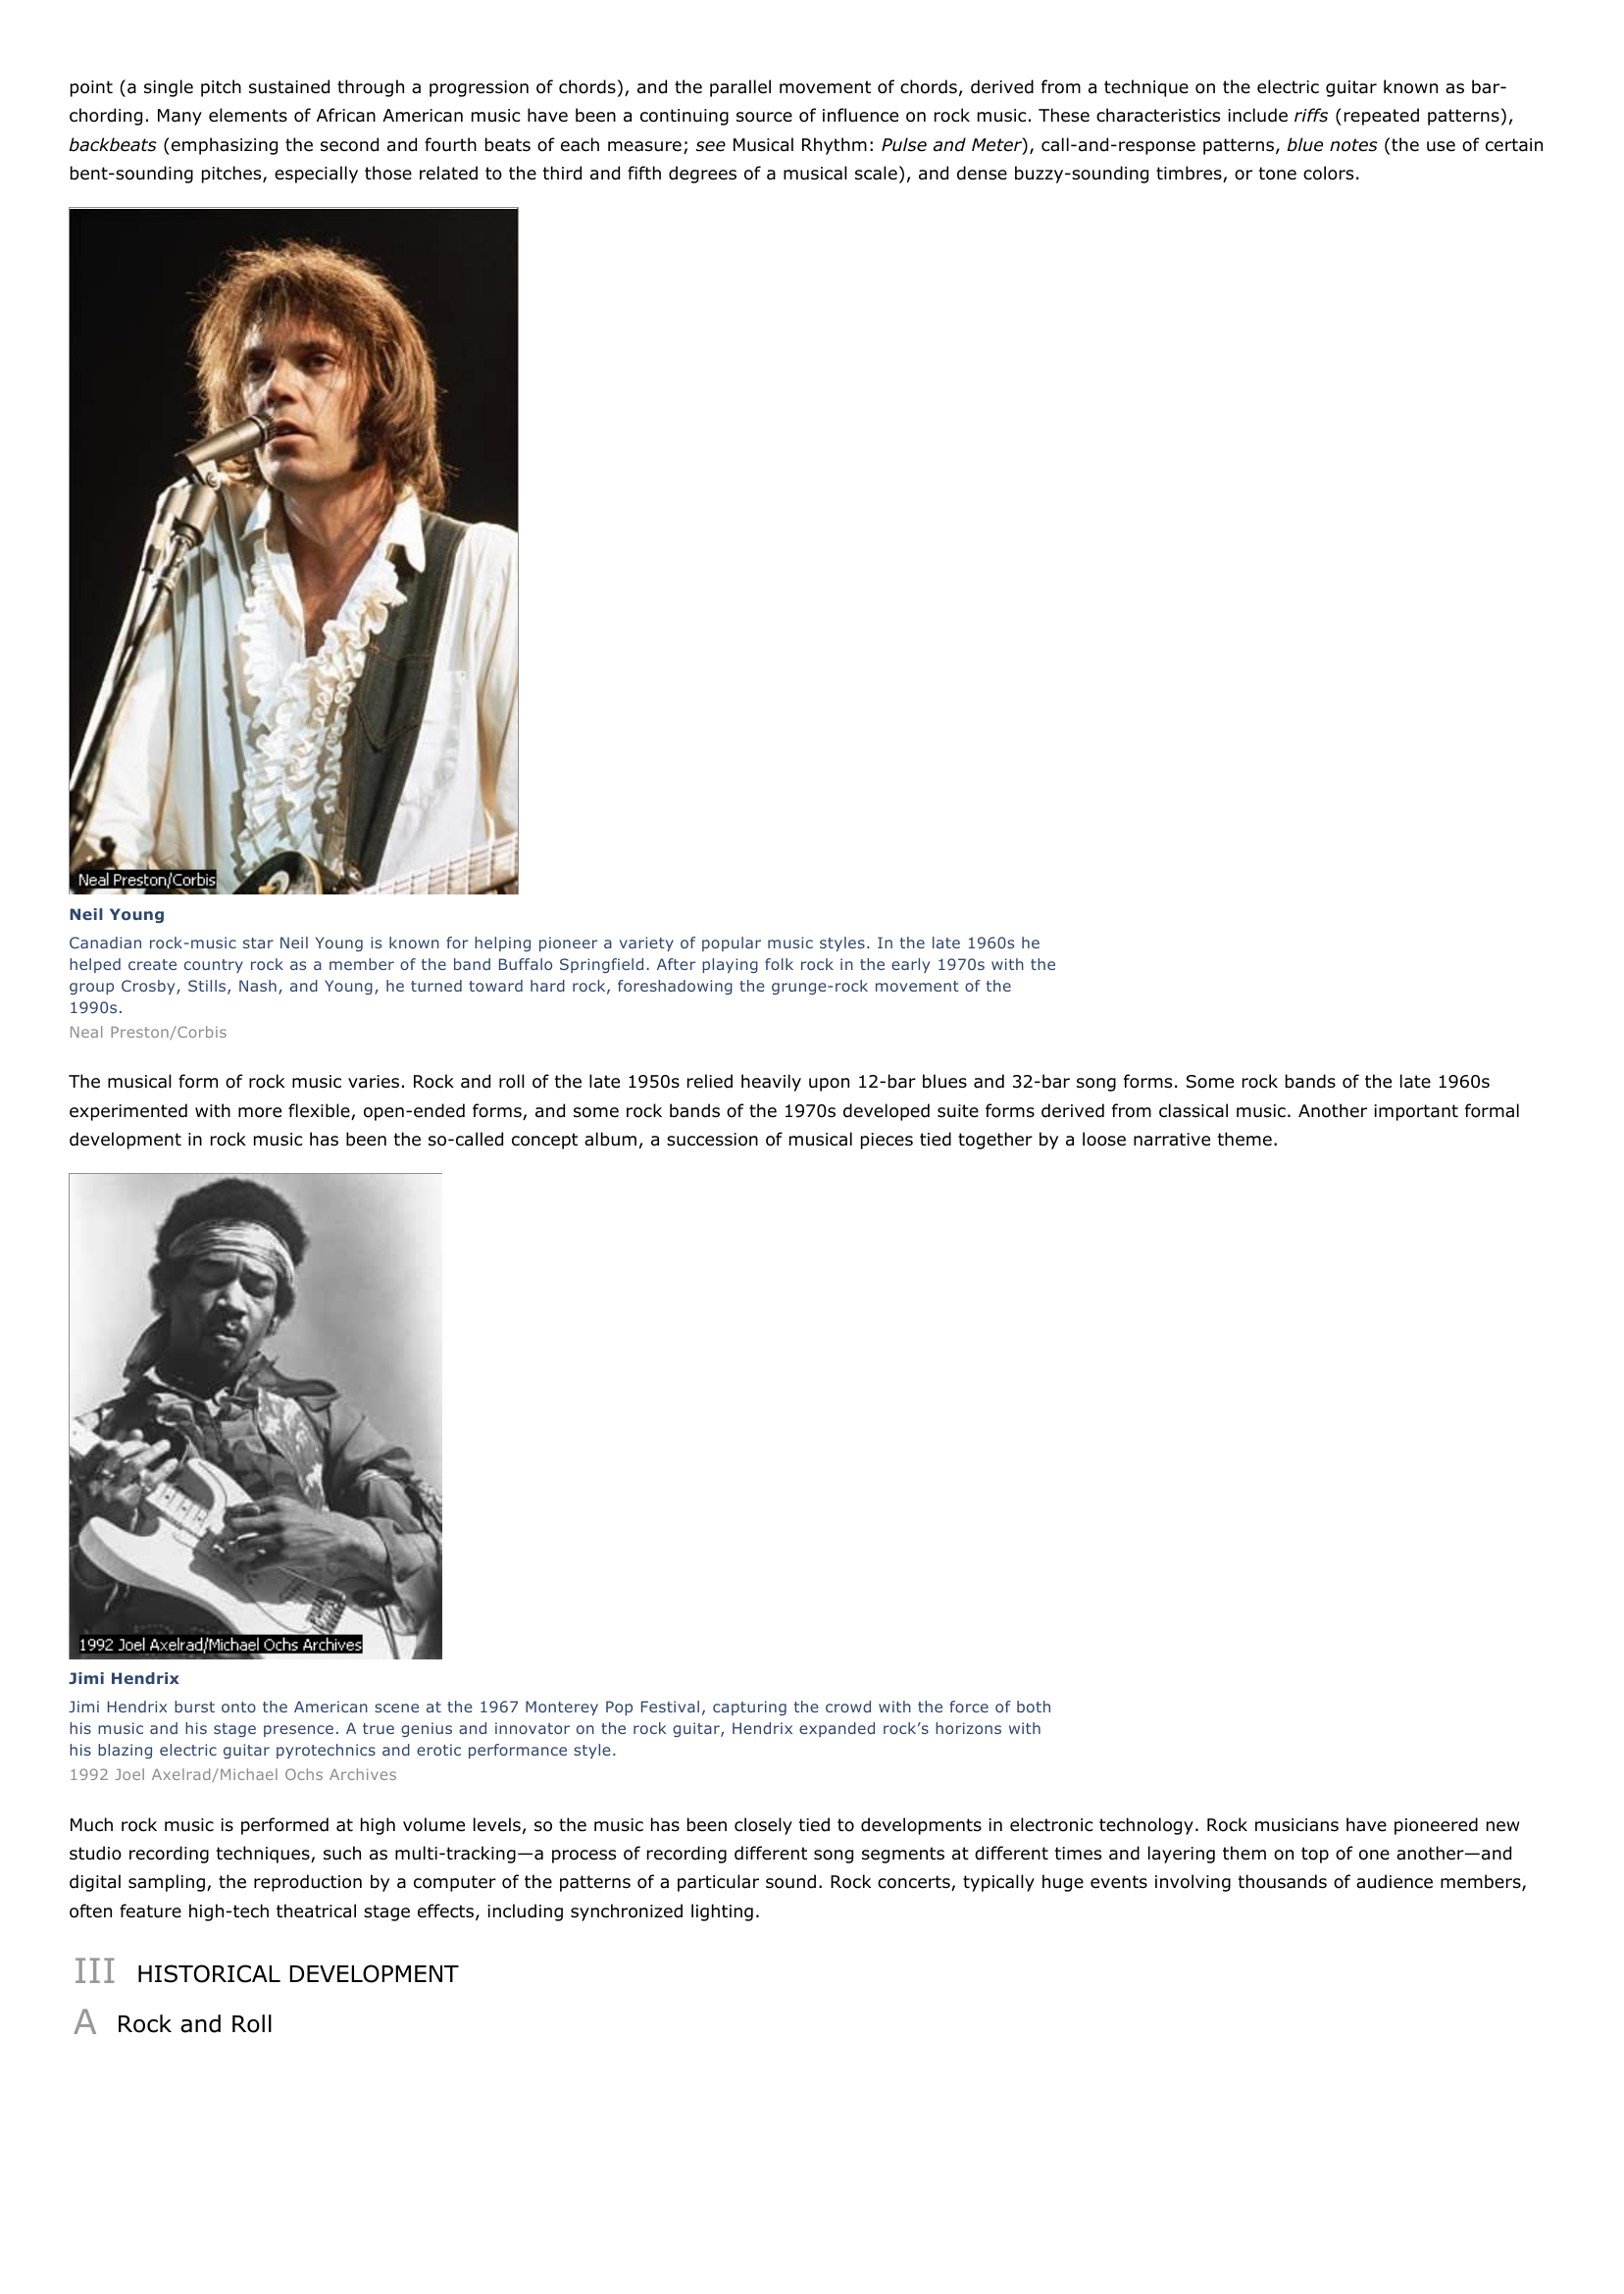 Prévisualisation du document Rock Music
I

INTRODUCTION

Carlos Santana
Mexican-born guitarist Carlos Santana became a superstar in the late 1960s with a string of hits and an appearance at the
famous Woodstock rock festival in 1969.